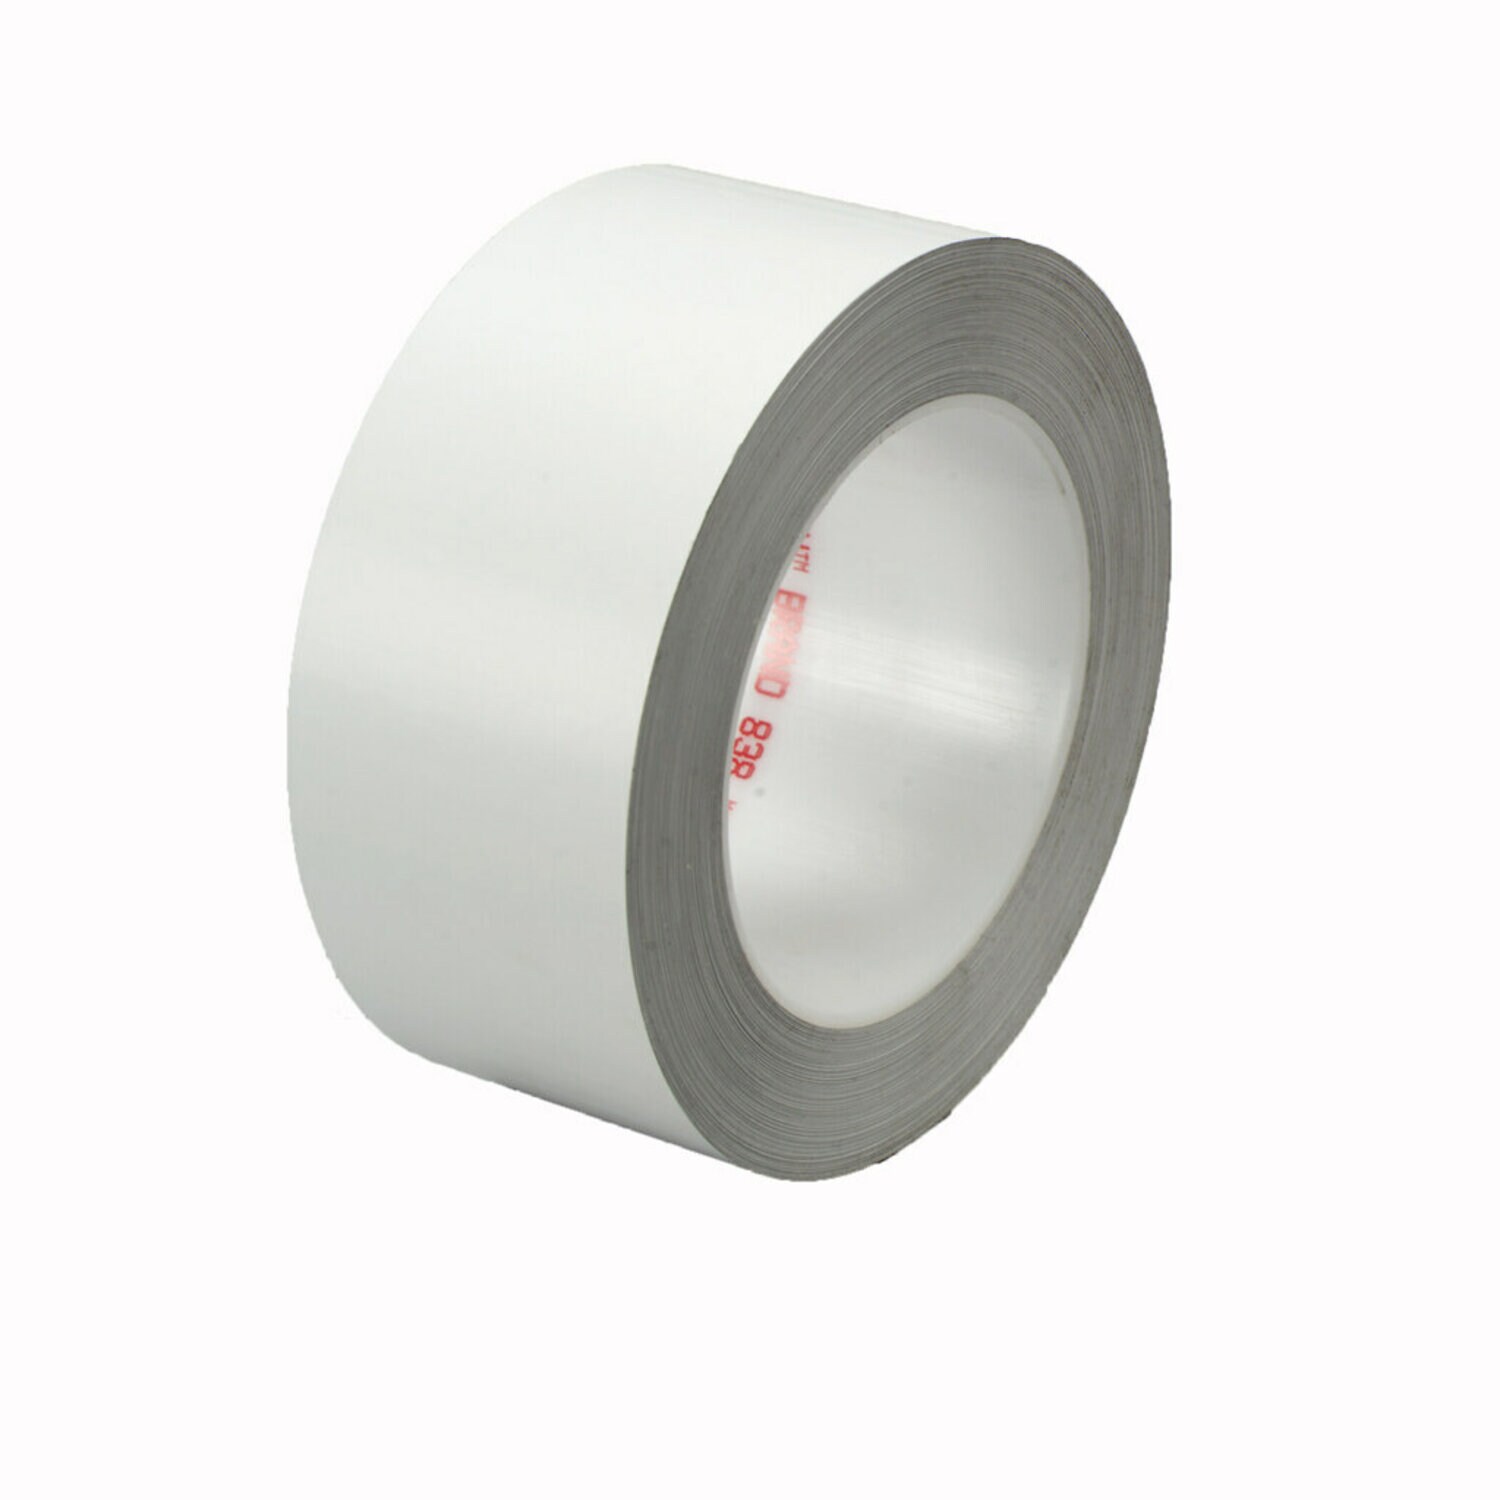 1/2 inch Art Tape 2 Rolls- Professional Masking Tape - Low Tack, Low Adhesive Painters Tape - 40 yds per Pack - Two 20 yd Rolls